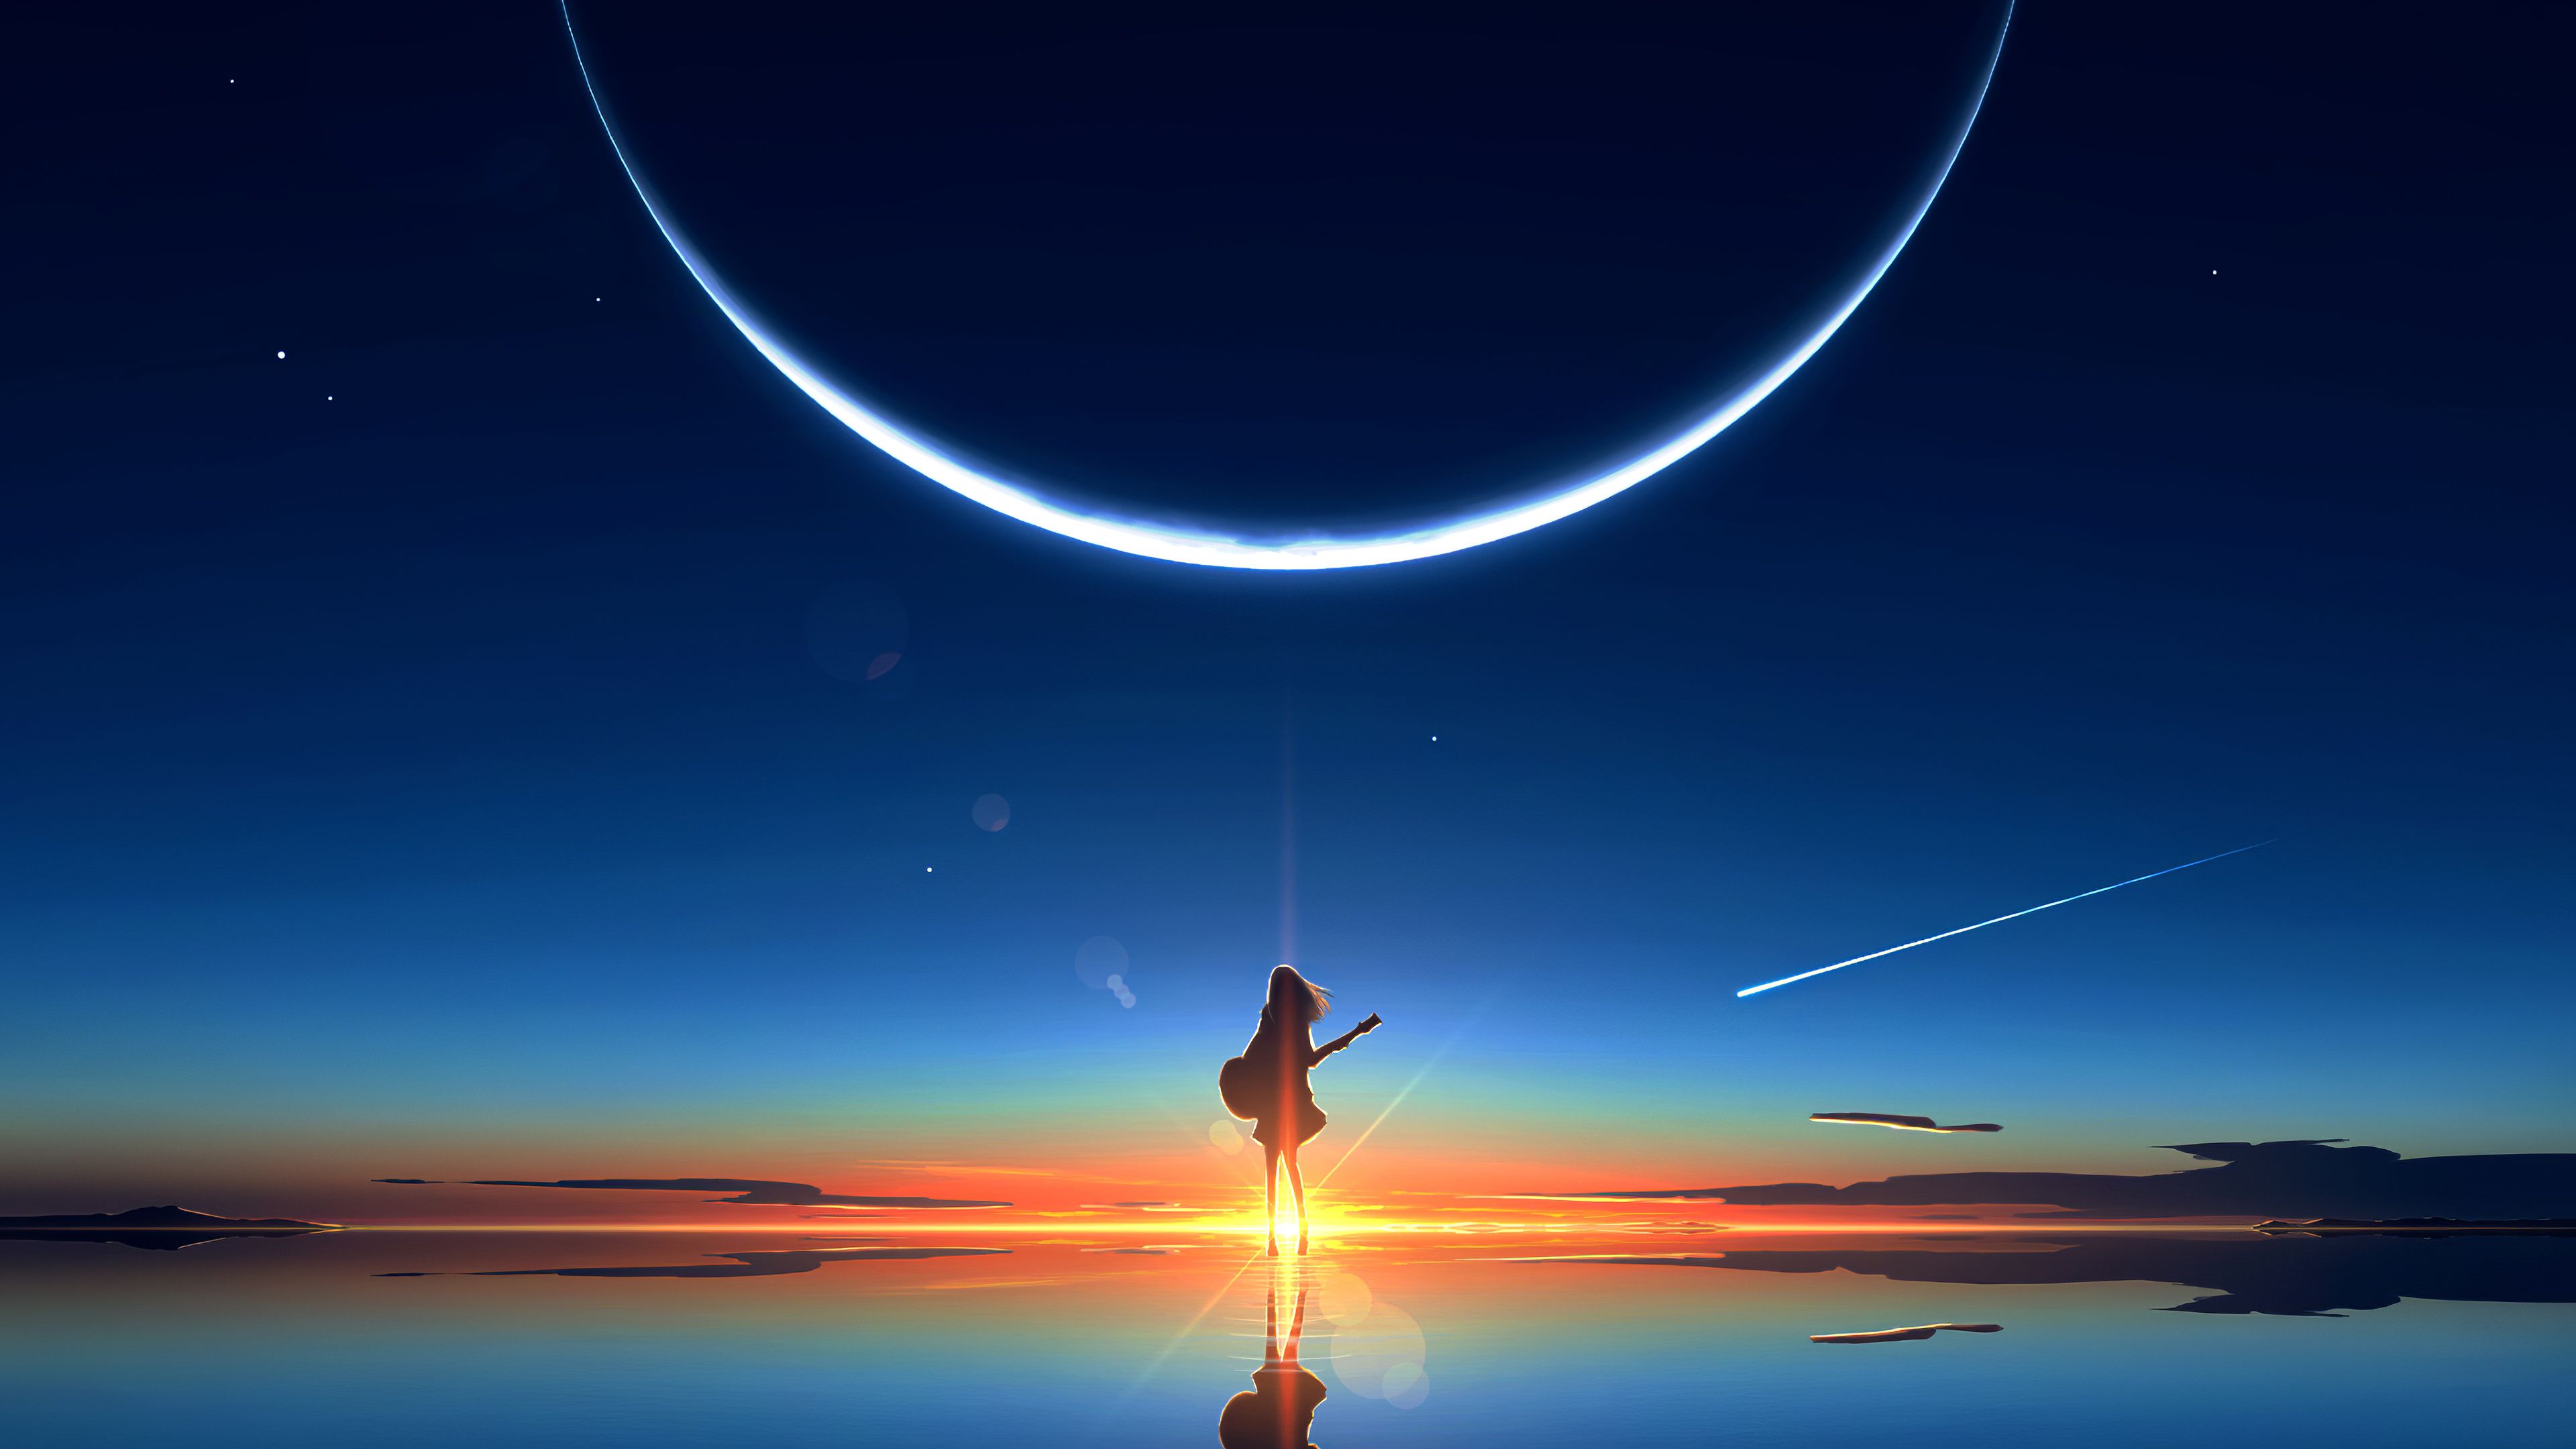 Earth Planet Space View Moon Anime Stock Illustration 1620511159   Shutterstock